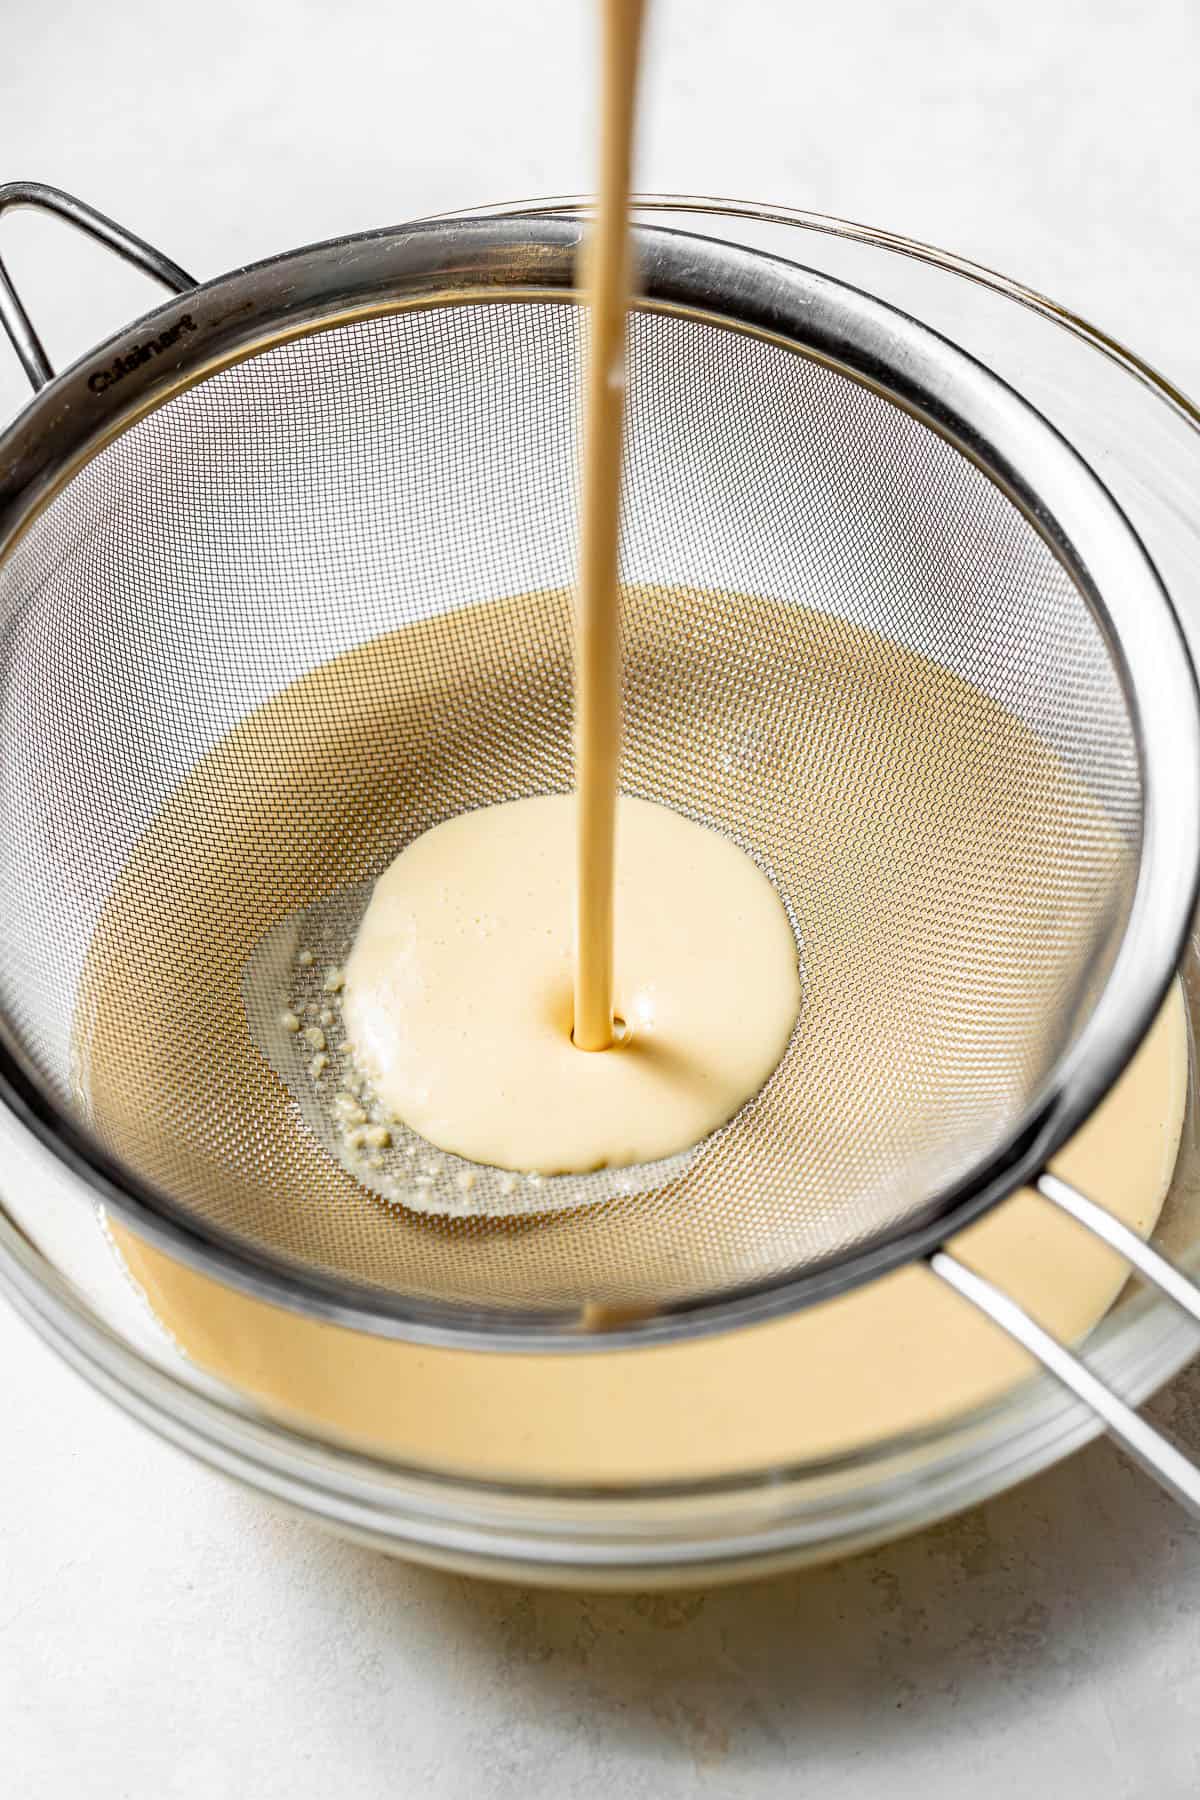 crepe batter poured through a sieve into a glass bowl.